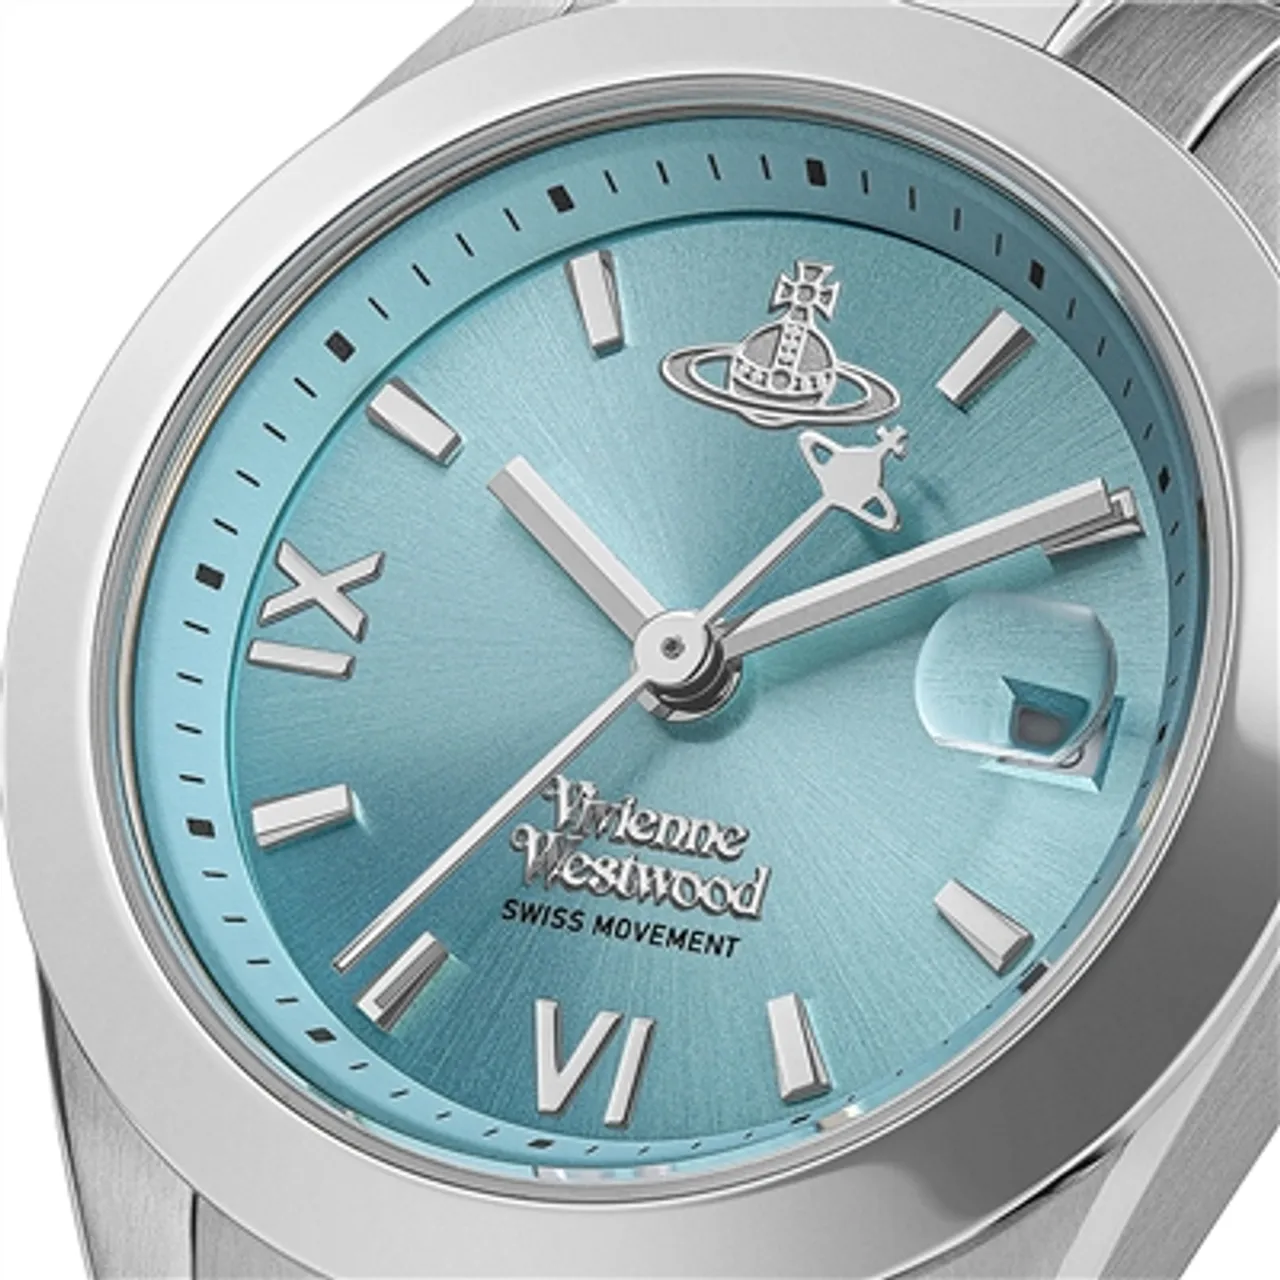 Vivienne Westwood Silver and Turquoise Fenchurch Watch - Silver